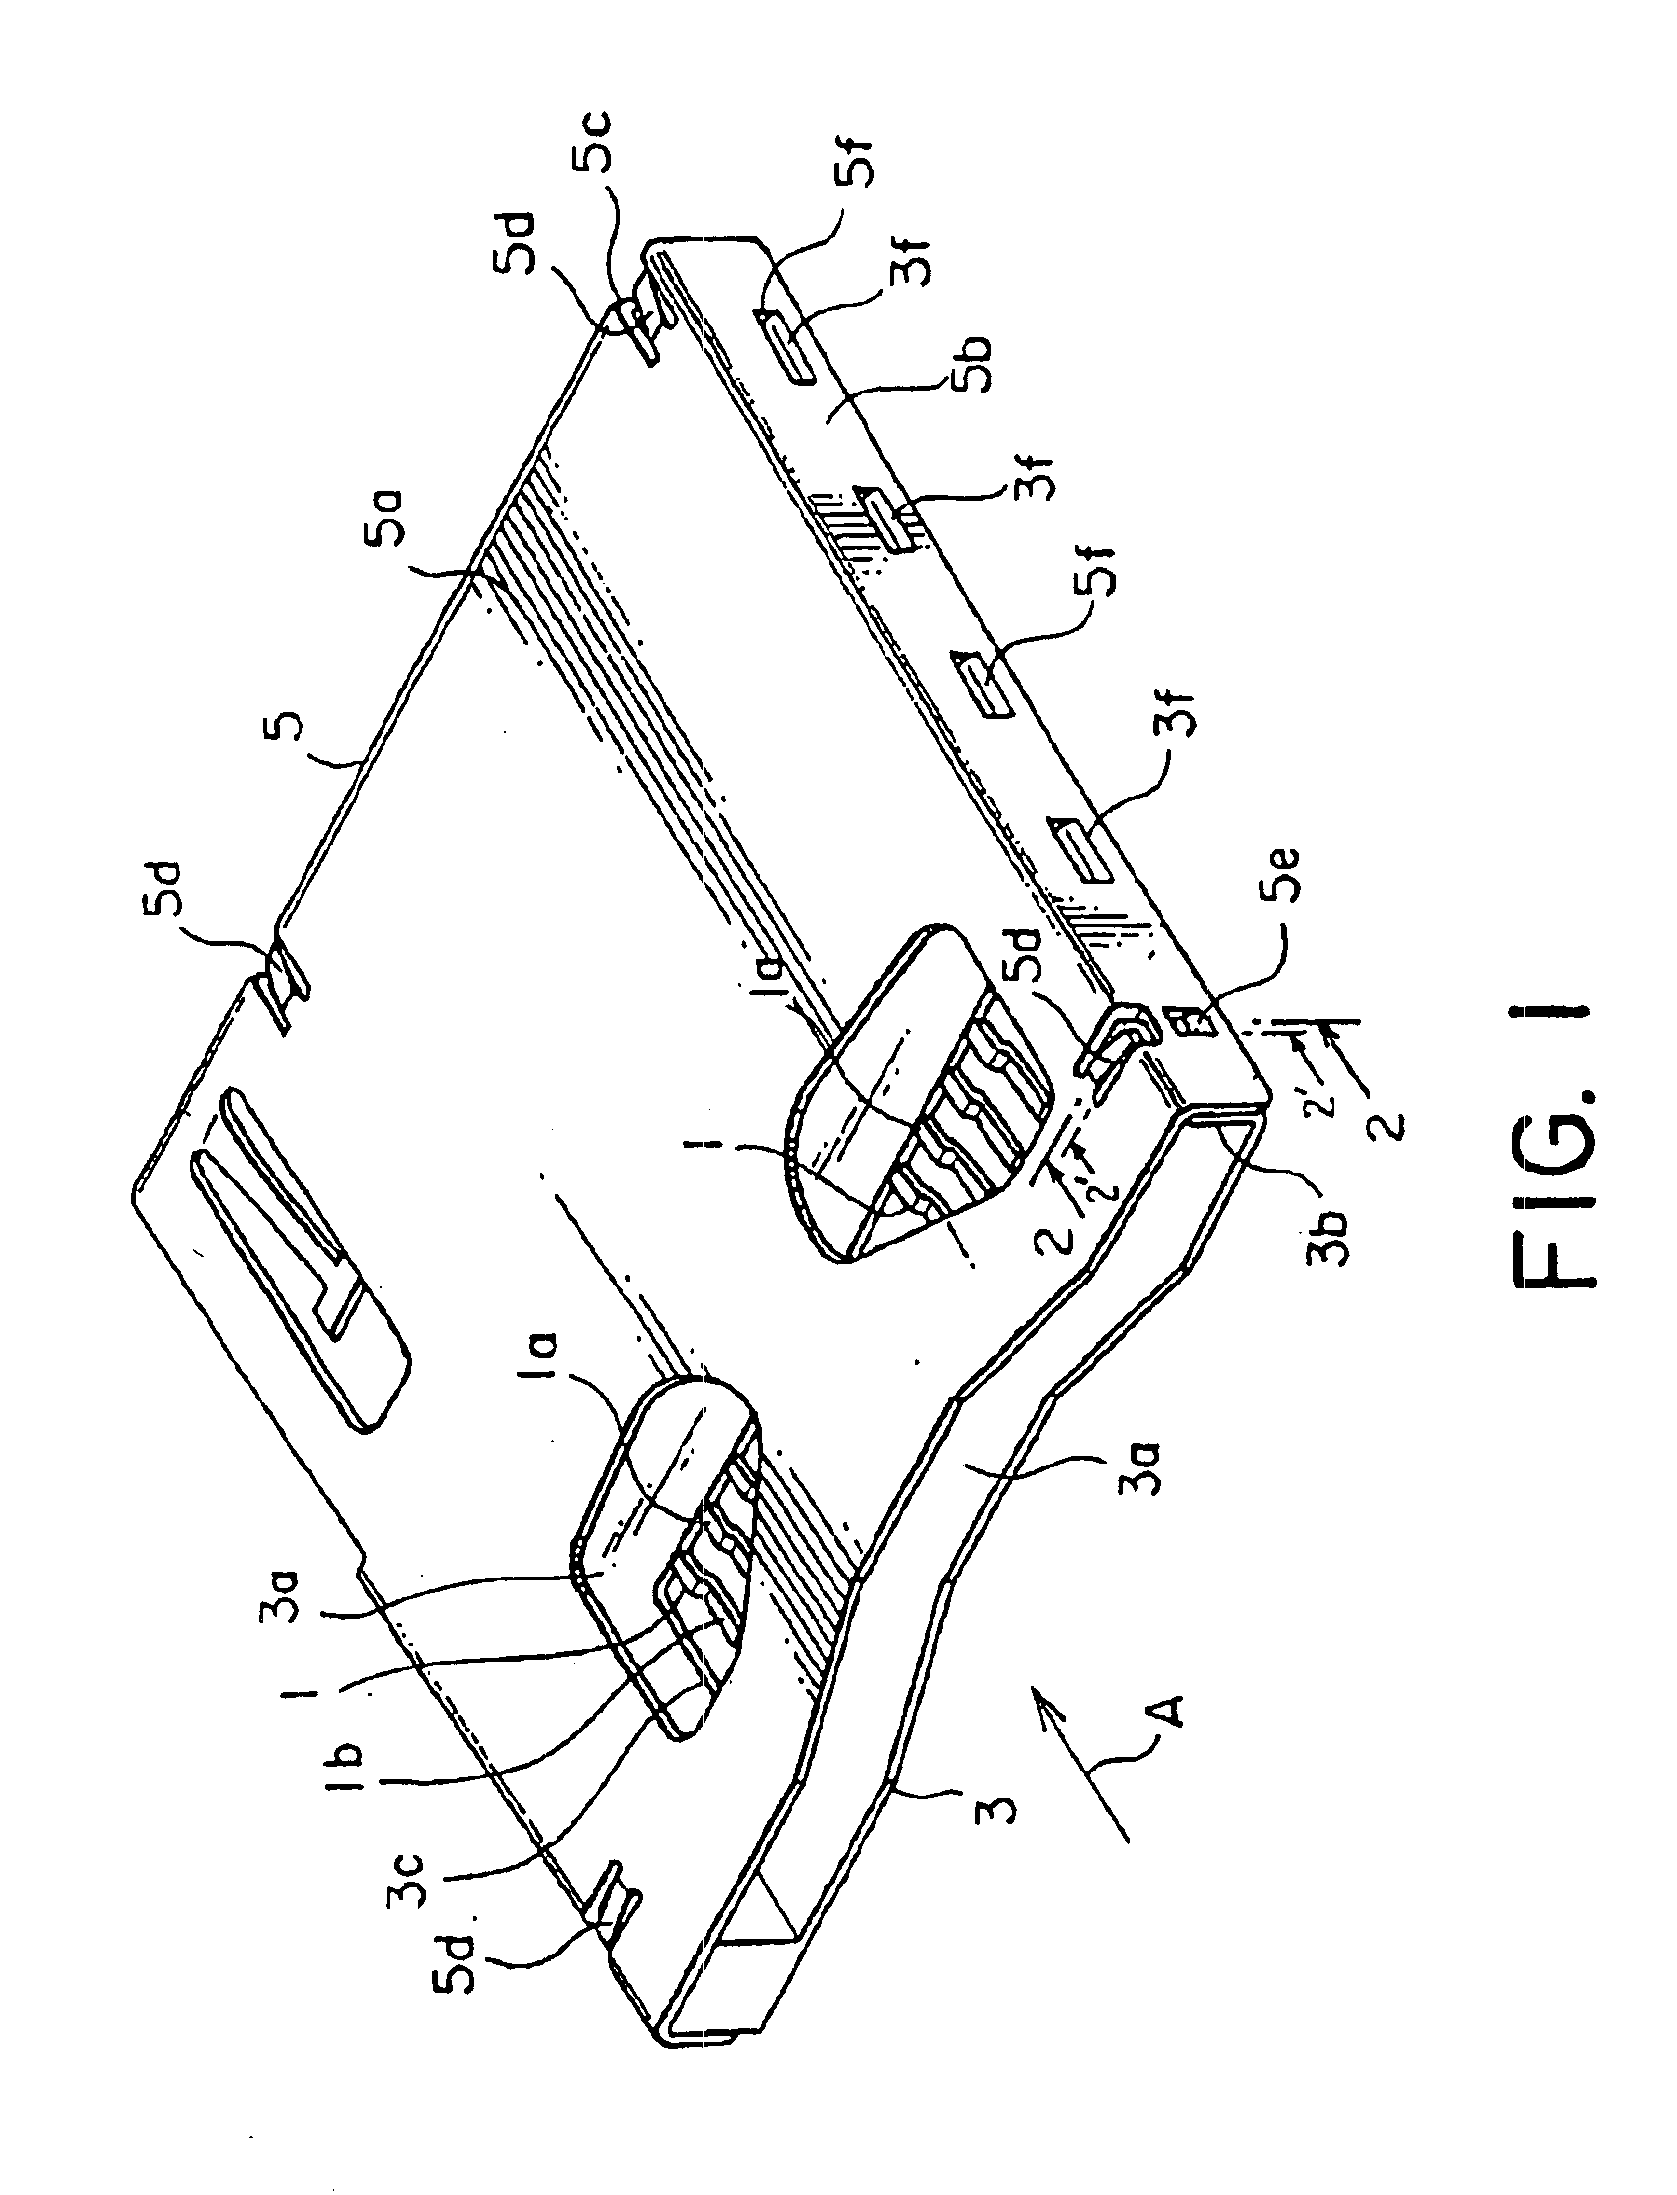 Electrical connector having a holddown for ground connection